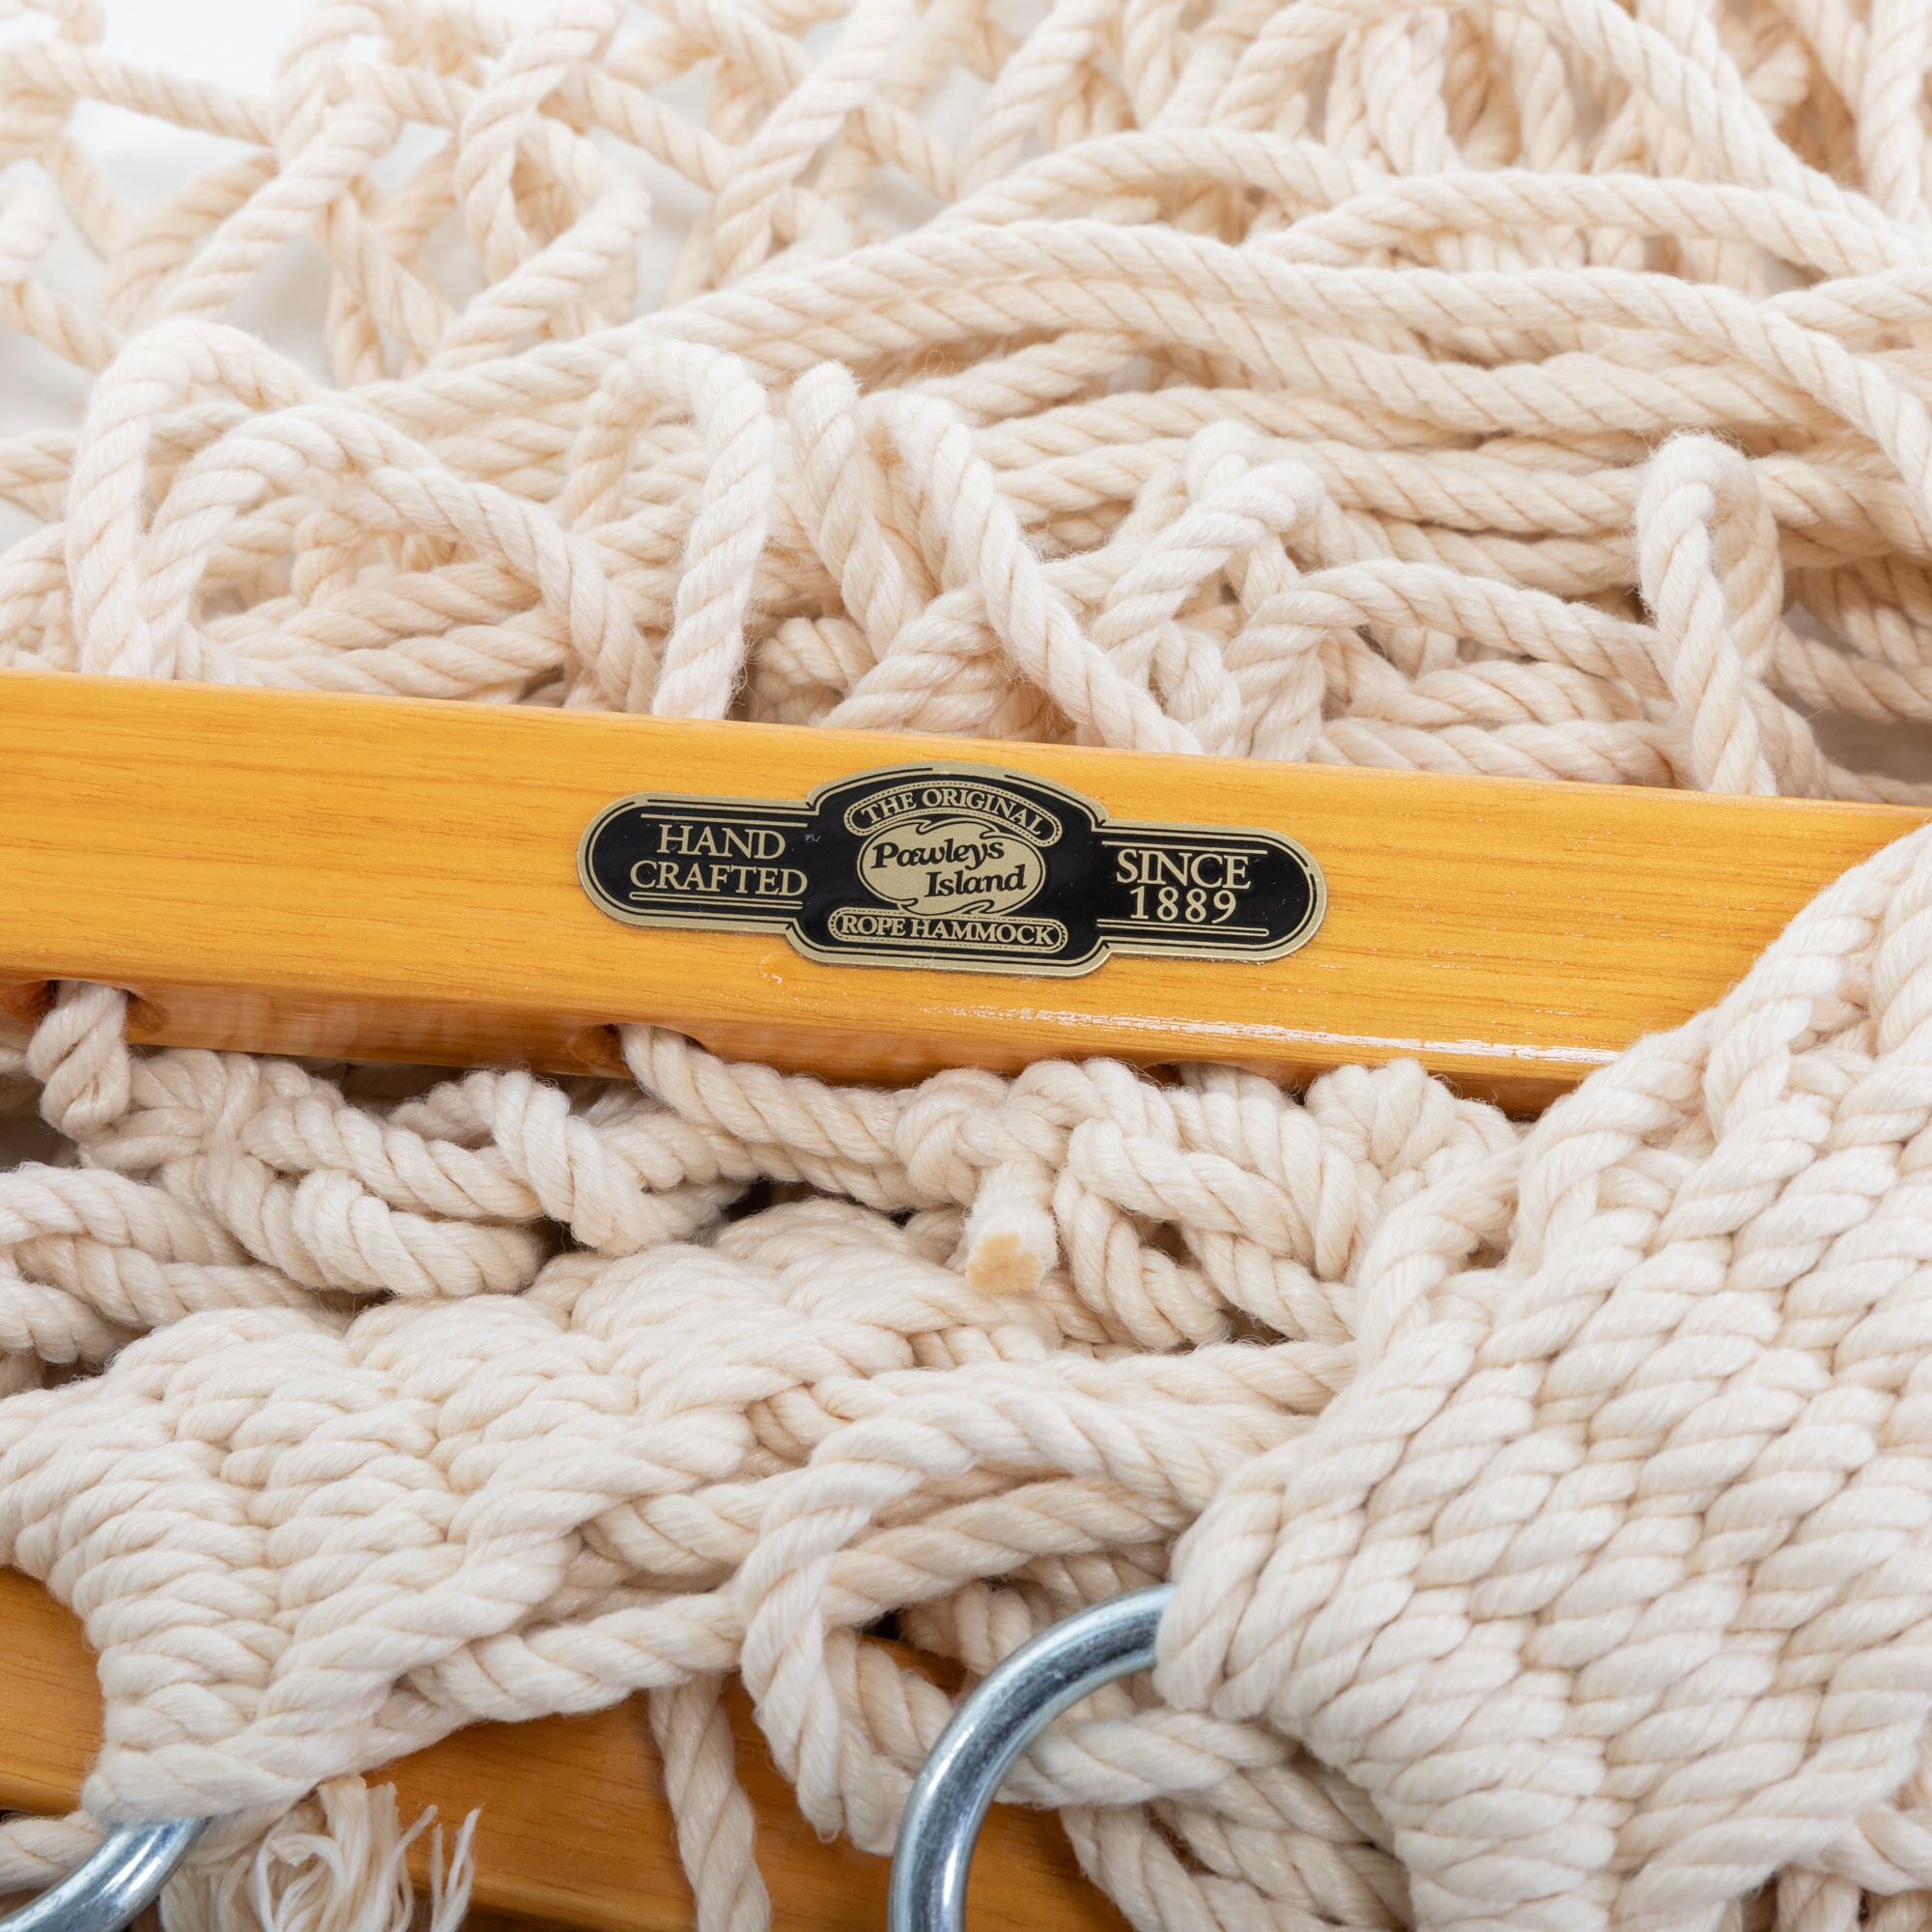  Natural Cotton Rope (3/4 in x 50 ft) Soft White Rope